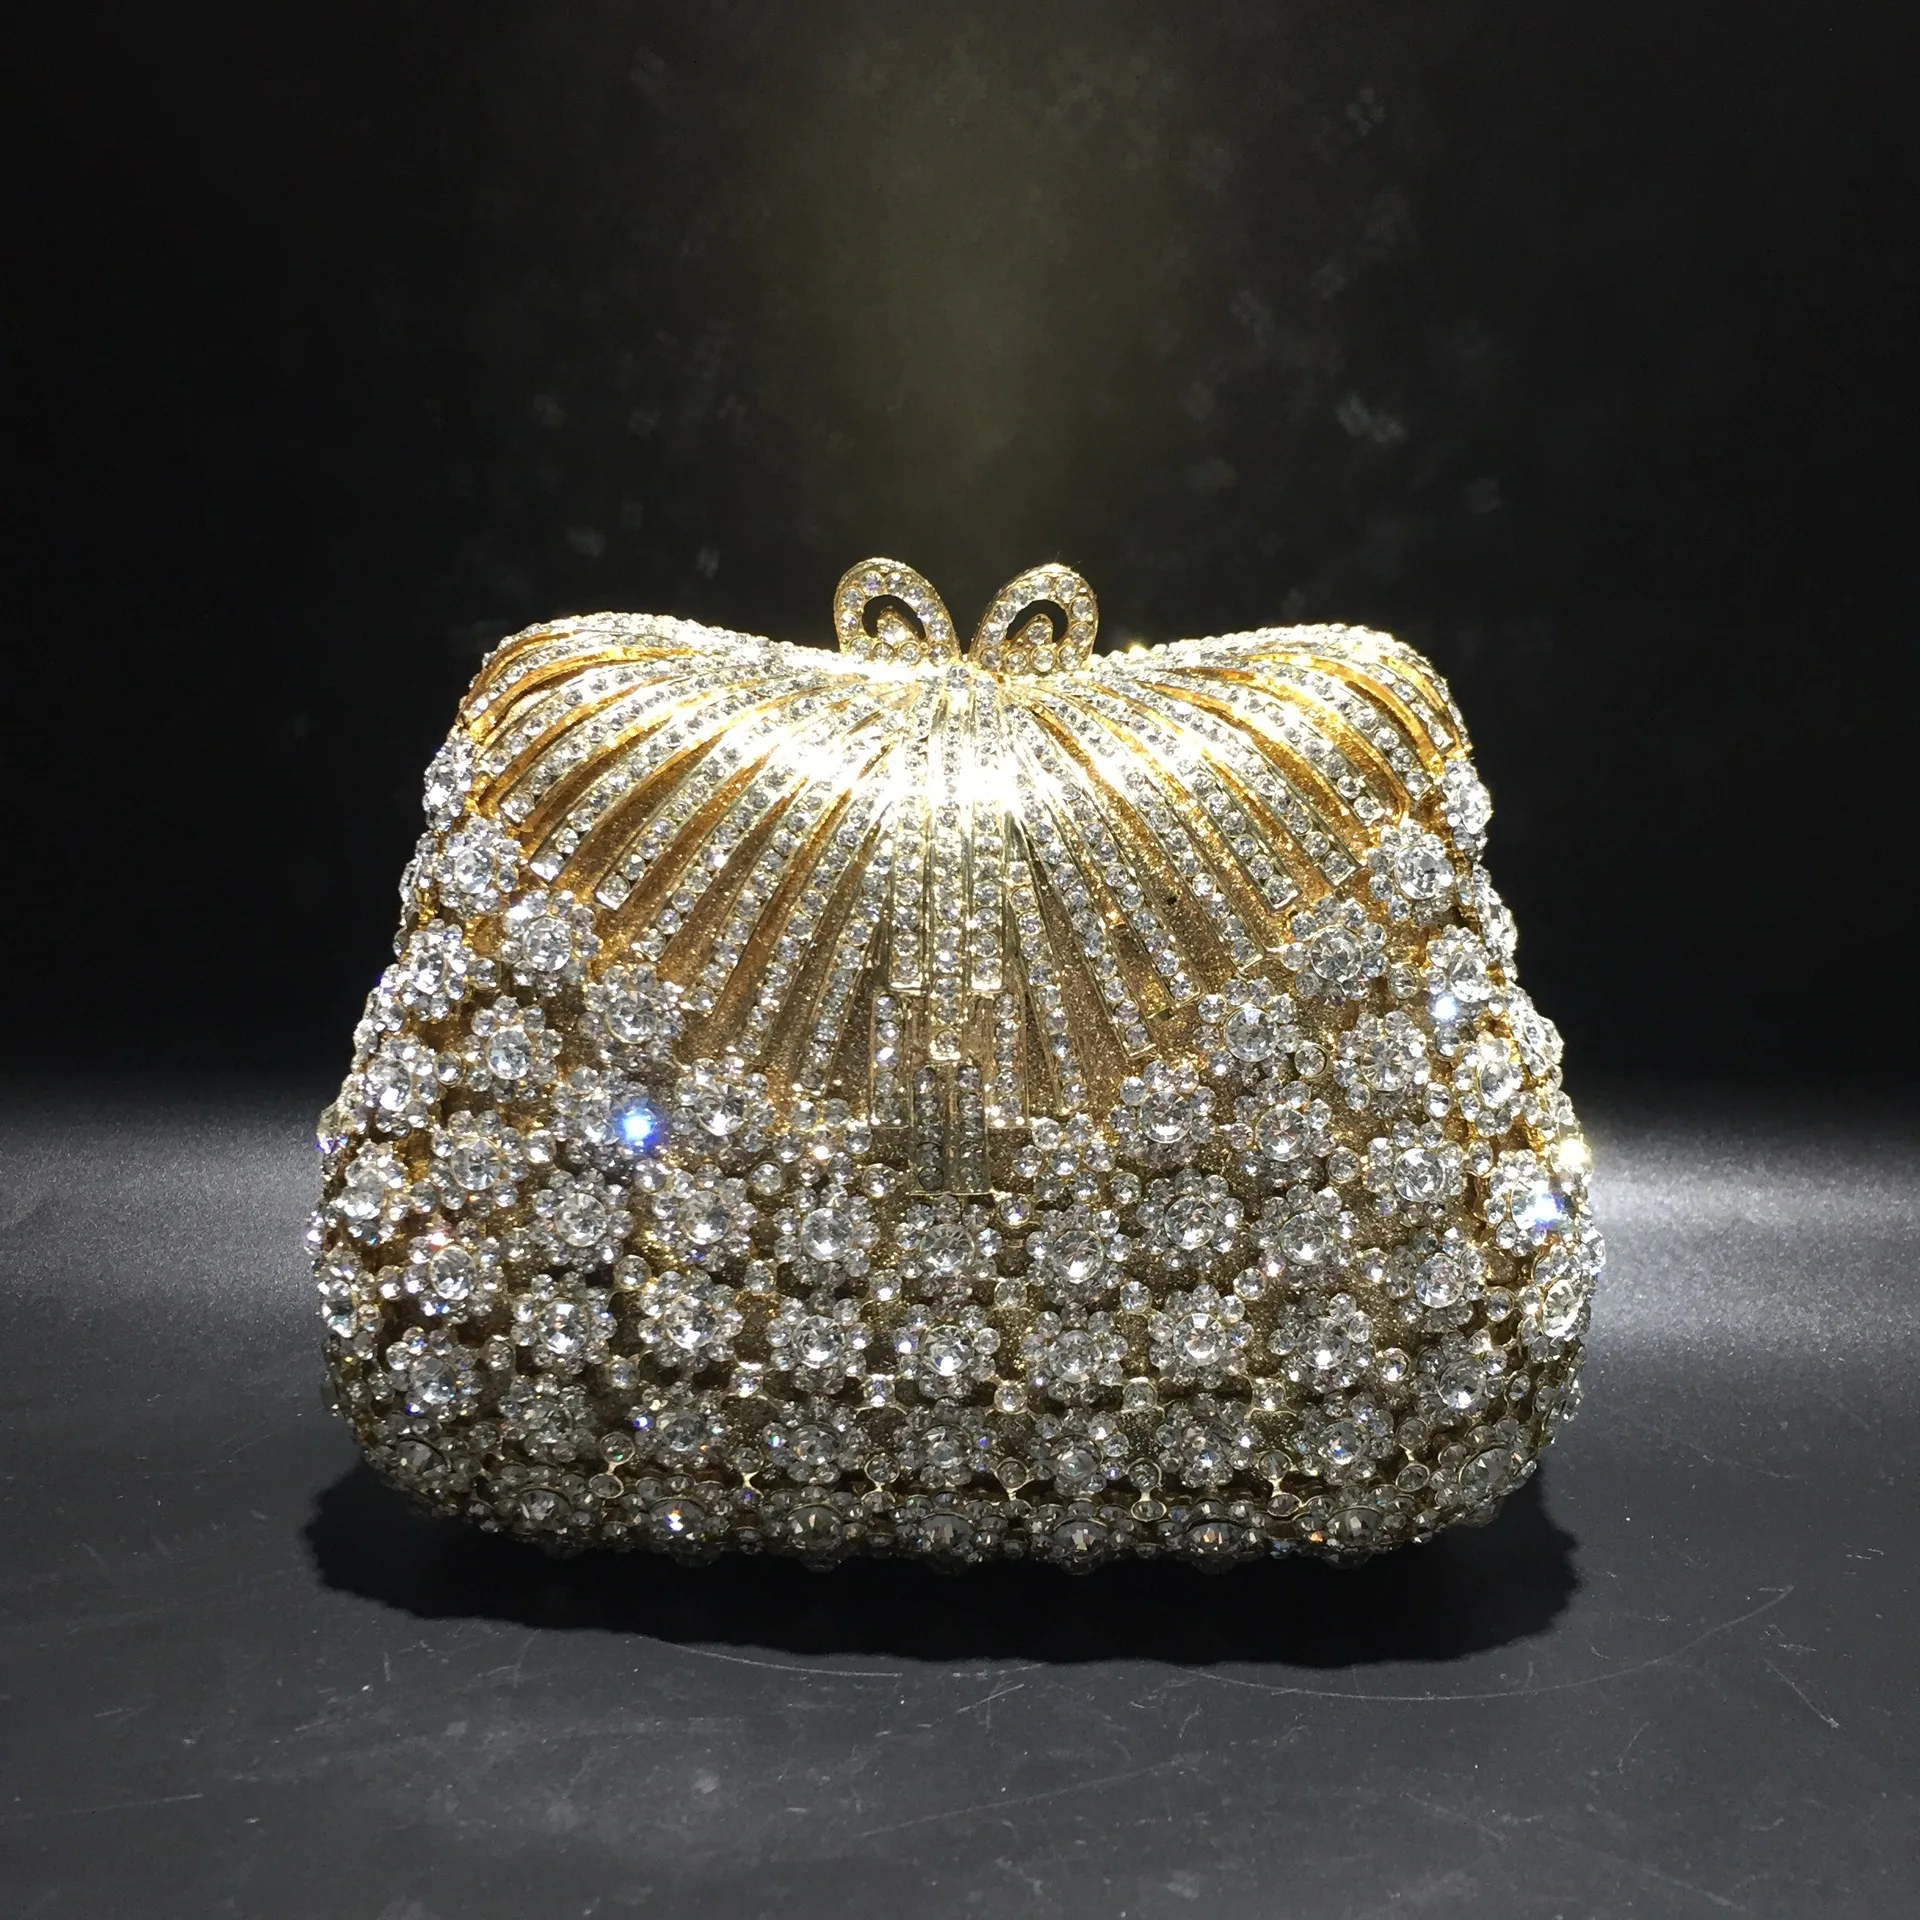 Accesorize Clutch gold-colored elegant Bags Clutches 